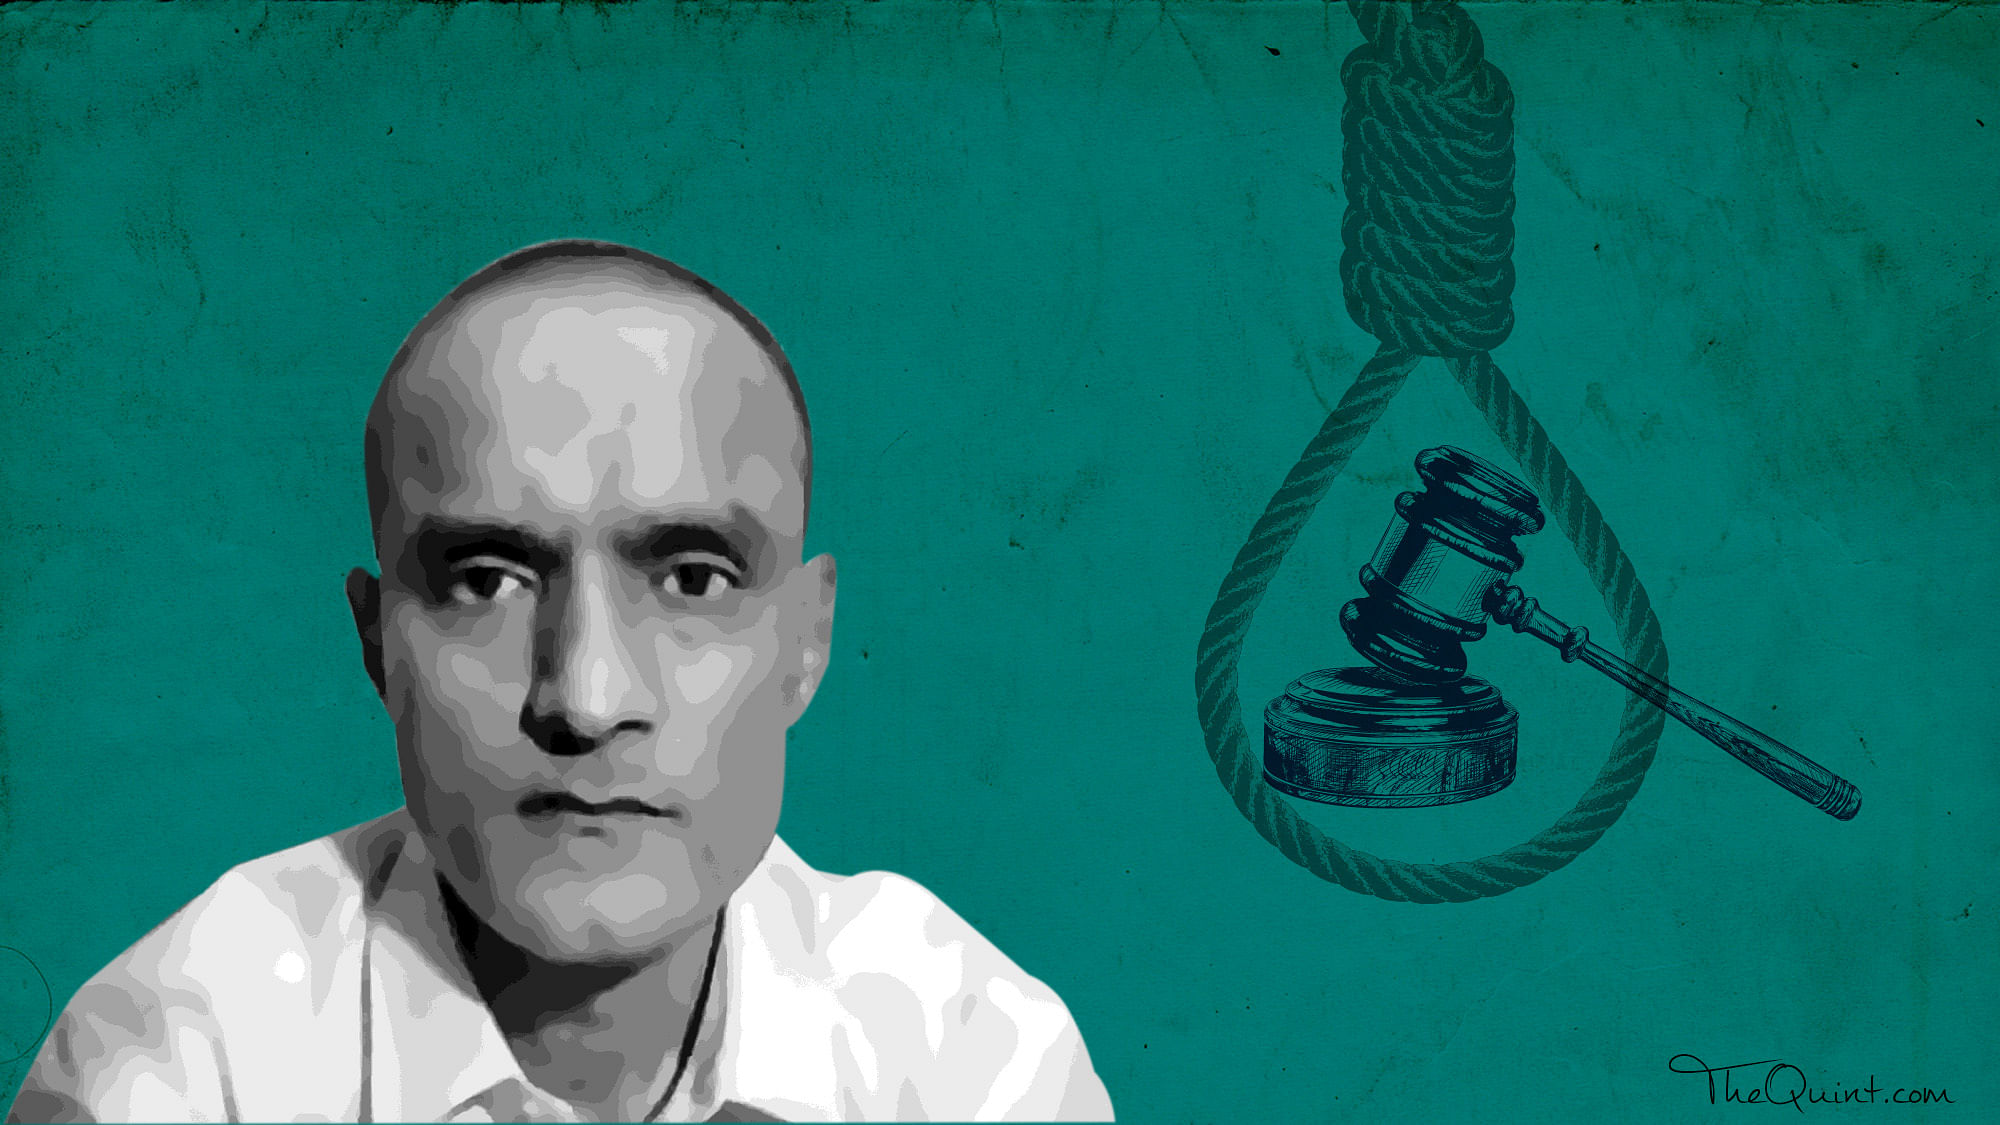 Kulbhushan Jadhav, who Islamabad claims is an Indian spy, was  sentenced to death by a Pakistani military court for espionage. (Photo: <b>The Quint</b>)